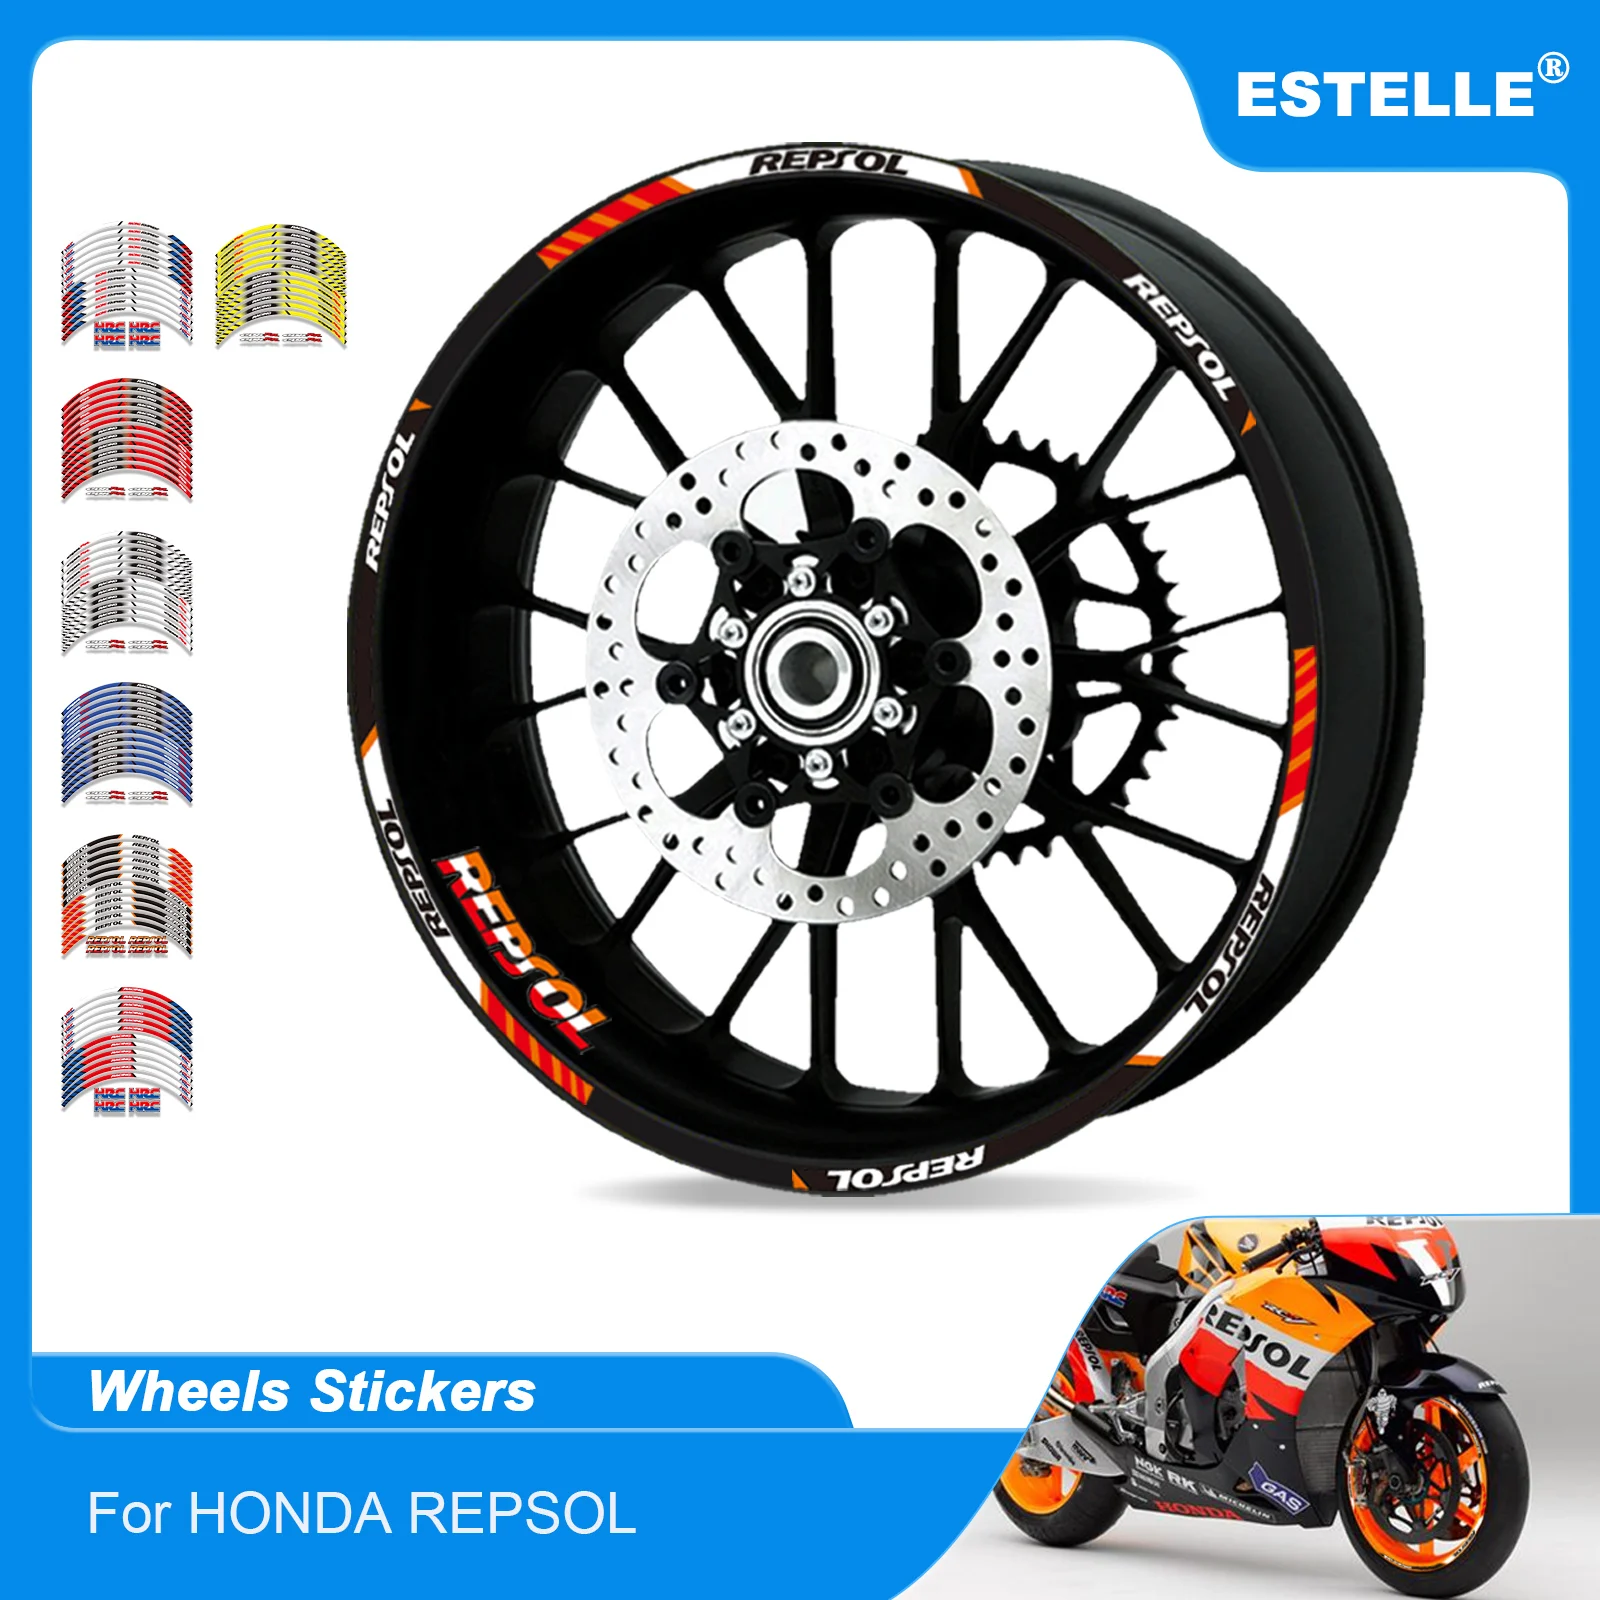 

For HONDA REPSOL HRC CBR RR All Years Motorcycle sticker Front Rear wheels decals Reflective waterproof stickers rim stripes